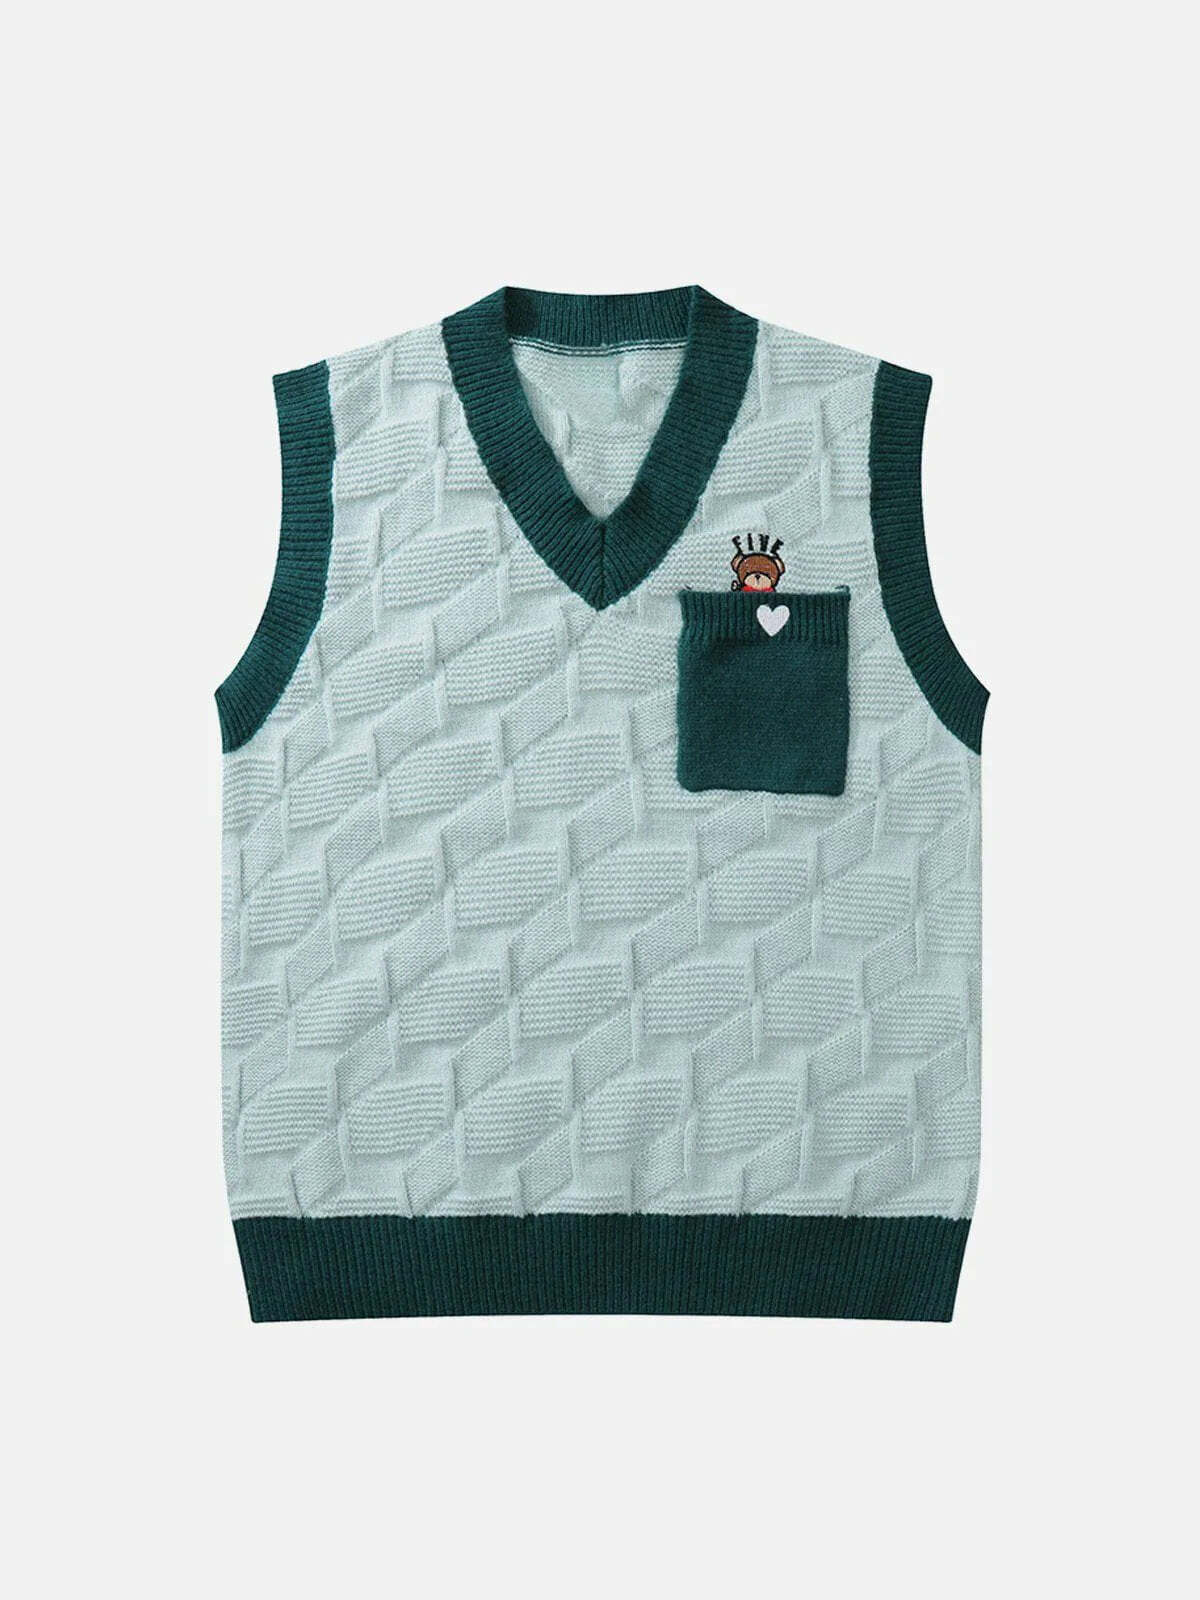 retro bear sweater vest edgy and vibrant y2k streetwear 3280